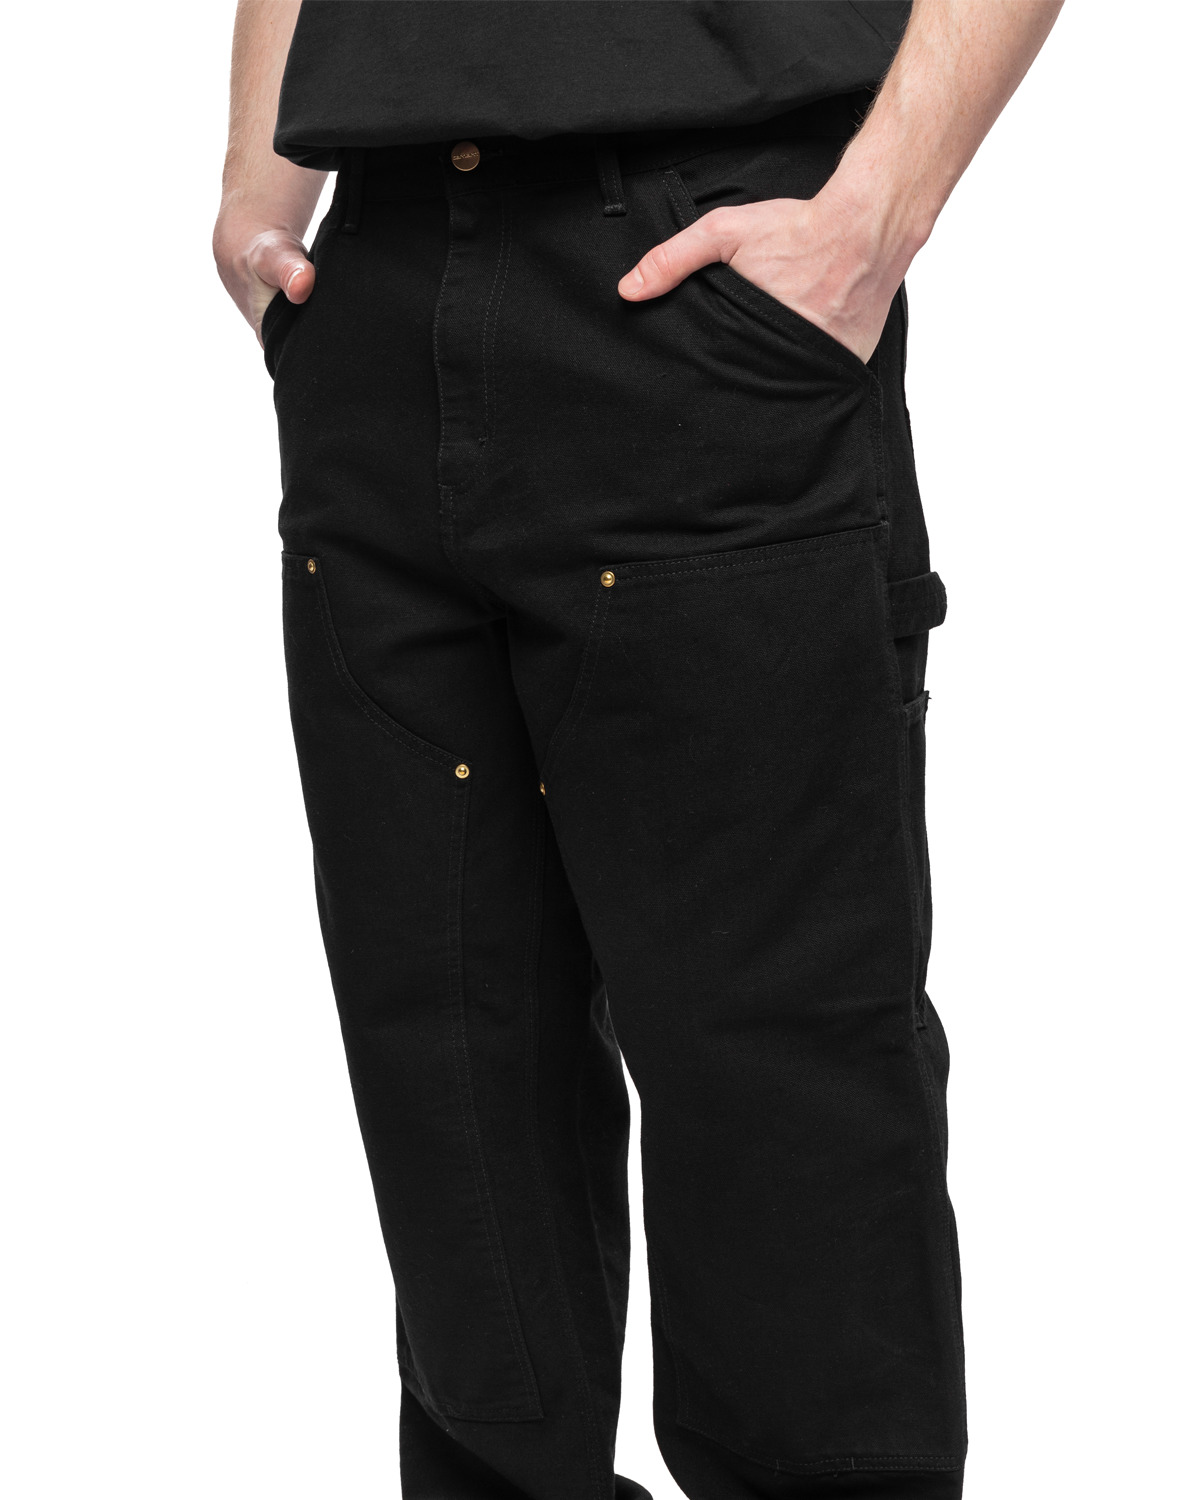 SS24 Double Knee Pant Black (Rinsed) - 4